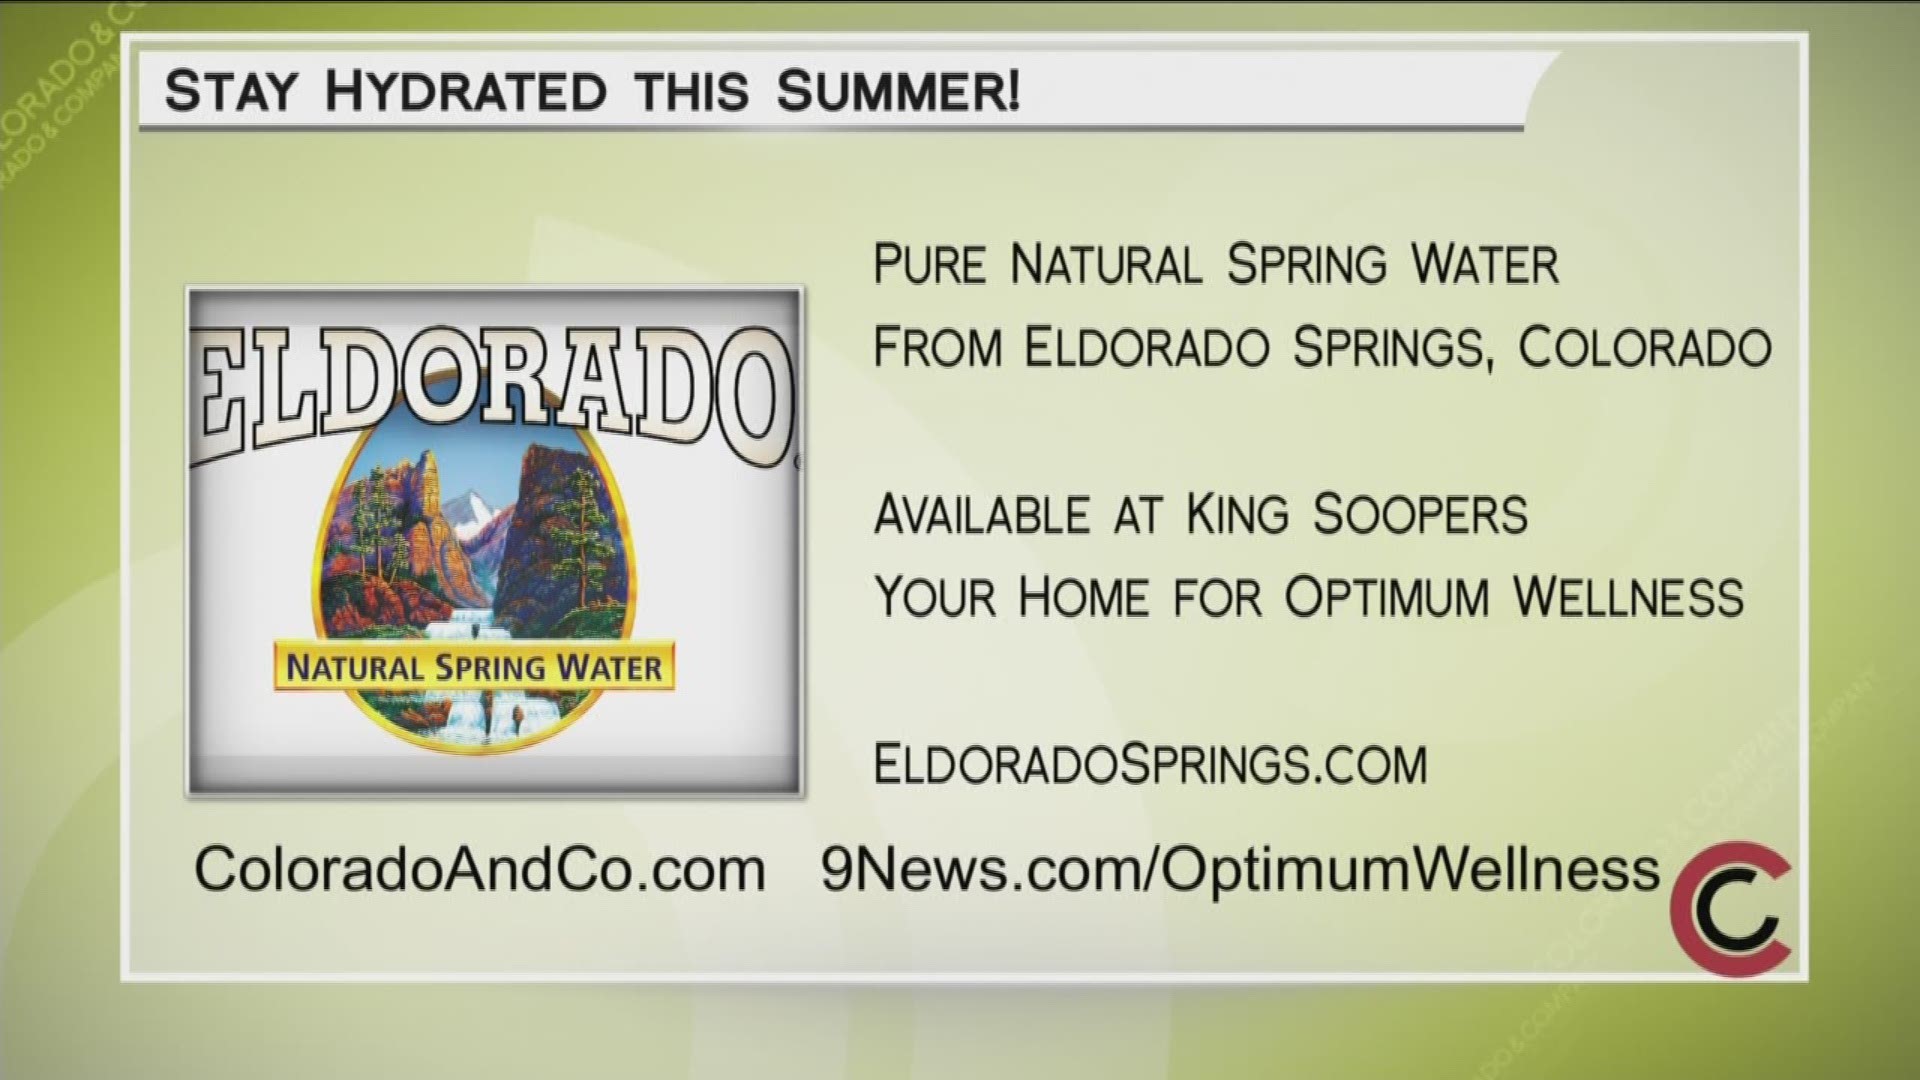 Find the full recipe for the Gazpacho at www.ColoradoAndCo.com. Eldorado Natural Spring Water is available at your neighborhood King Soopers, your home for Optimum Wellness. Learn more at www.EldoradoSprings.com. THIS INTERVIEW HAS COMMERCIAL CONTENT. PRODUCTS AND SERVICES FEATURED APPEAR AS PAID ADVERTISING.